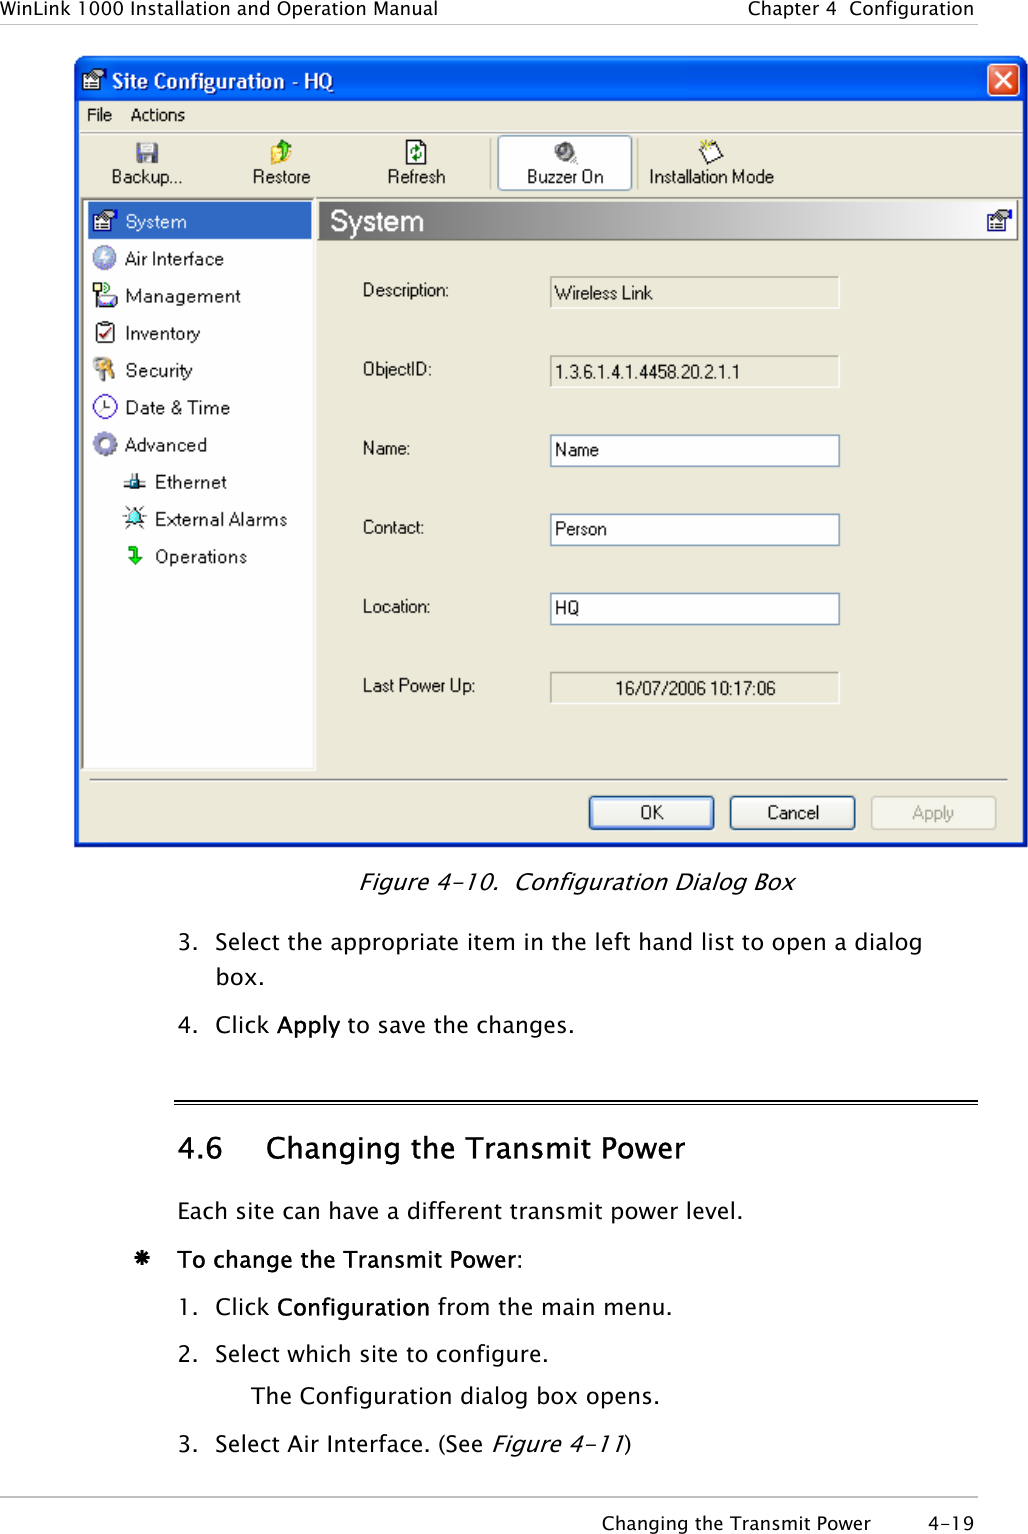 WinLink 1000 Installation and Operation Manual  Chapter  4  Configuration  Figure  4-10.  Configu ation Dialog Box r3. Select the appropriate item in the left hand list to open a dialog box. 4. Click Apply to save the changes. 4.6 Changing the Transmit Power Each site can have a different transmit power level.  Æ To change the Transmit Power: 1. Click Configuration from the main menu. 2. Select which site to configure. The Configuration dialog box opens. 3. Select Air Interface. (See Figure  4-11)   Changing the Transmit Power  4-19 